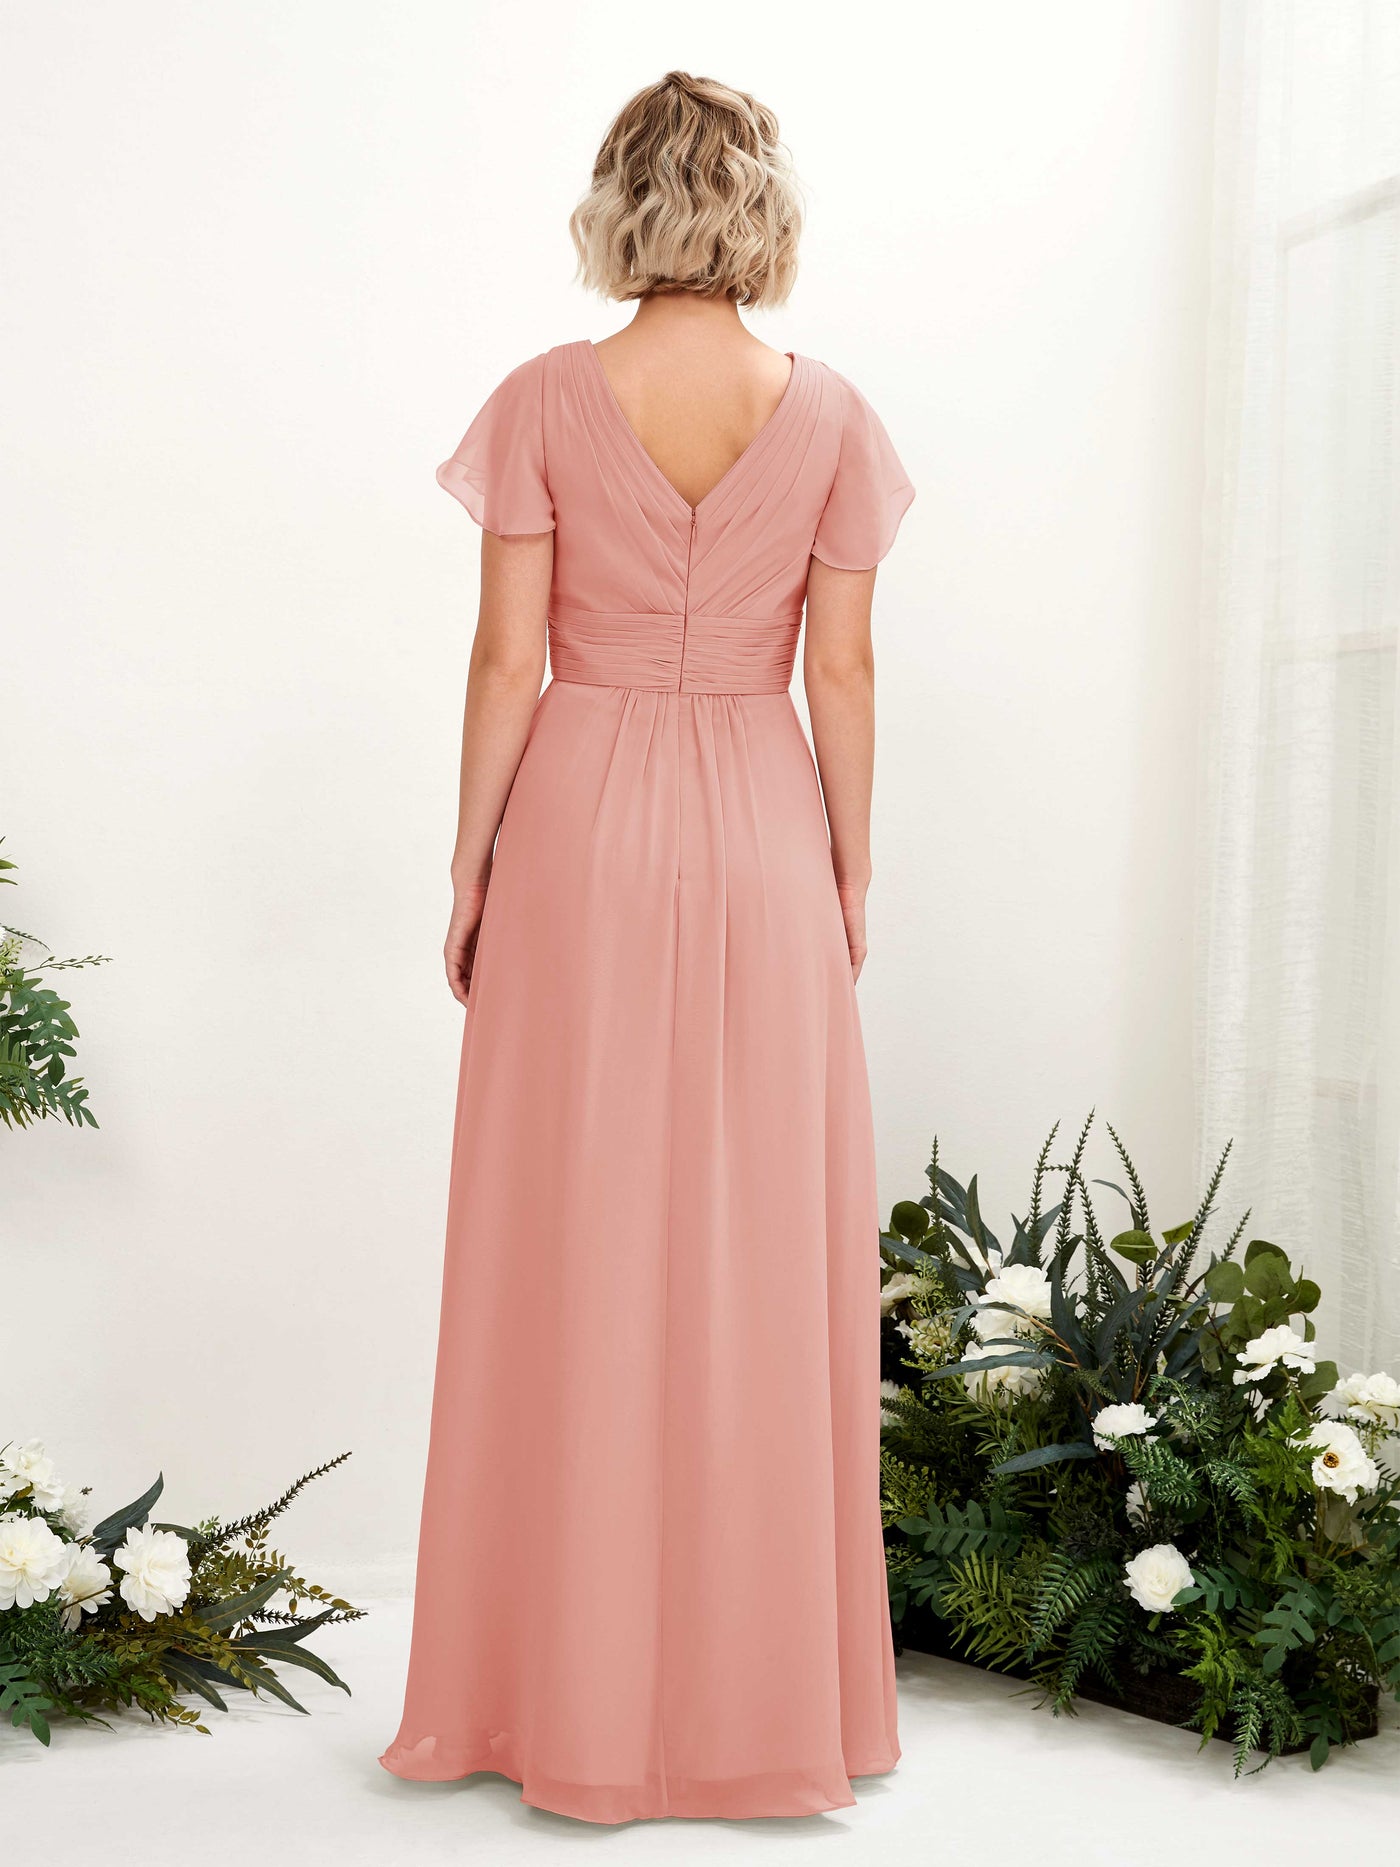 Champagne Rose Bridesmaid Dresses Bridesmaid Dress A-line Chiffon V-neck Full Length Short Sleeves Wedding Party Dress (81224306)#color_champagne-rose